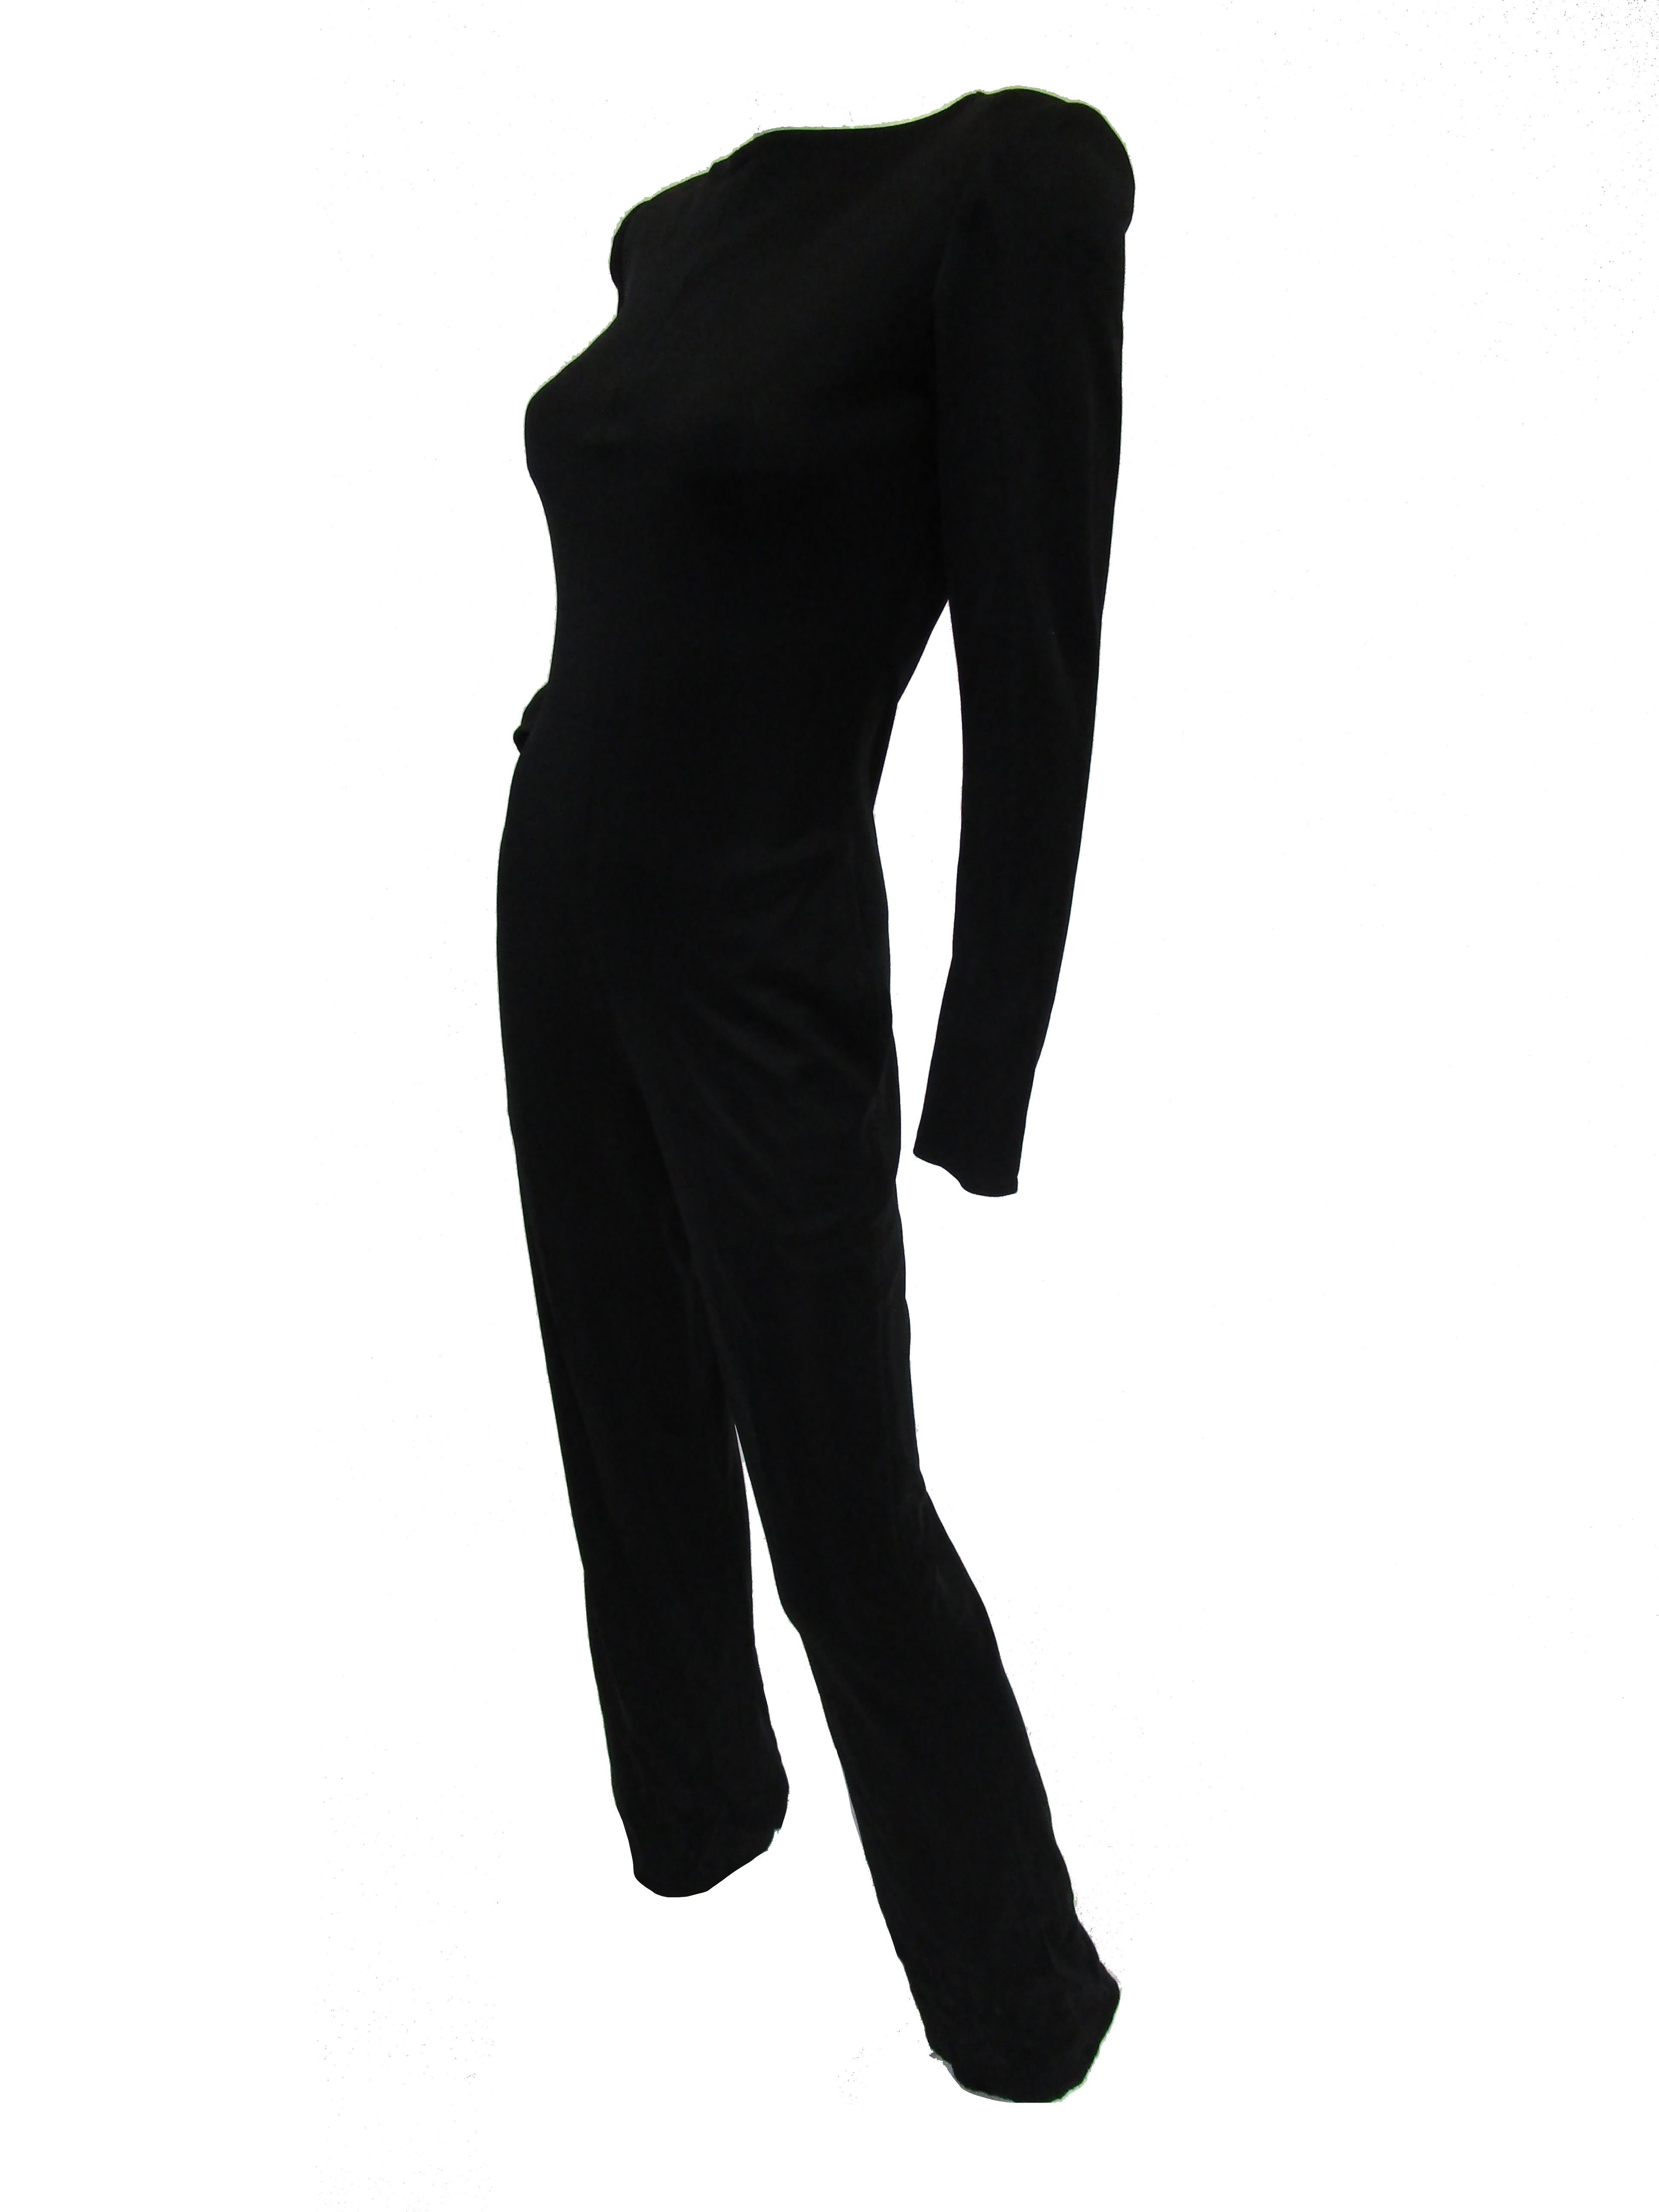 Simple and chic black silk blend jumpsuit by Yves Saint Laurent. The jumpsuit skims the body, with a somewhat fitted waist, long sleeves, and long pants. Bateau neckline adds a bit of french flair. The jumpsuit is classic, and evokes thoughts of a